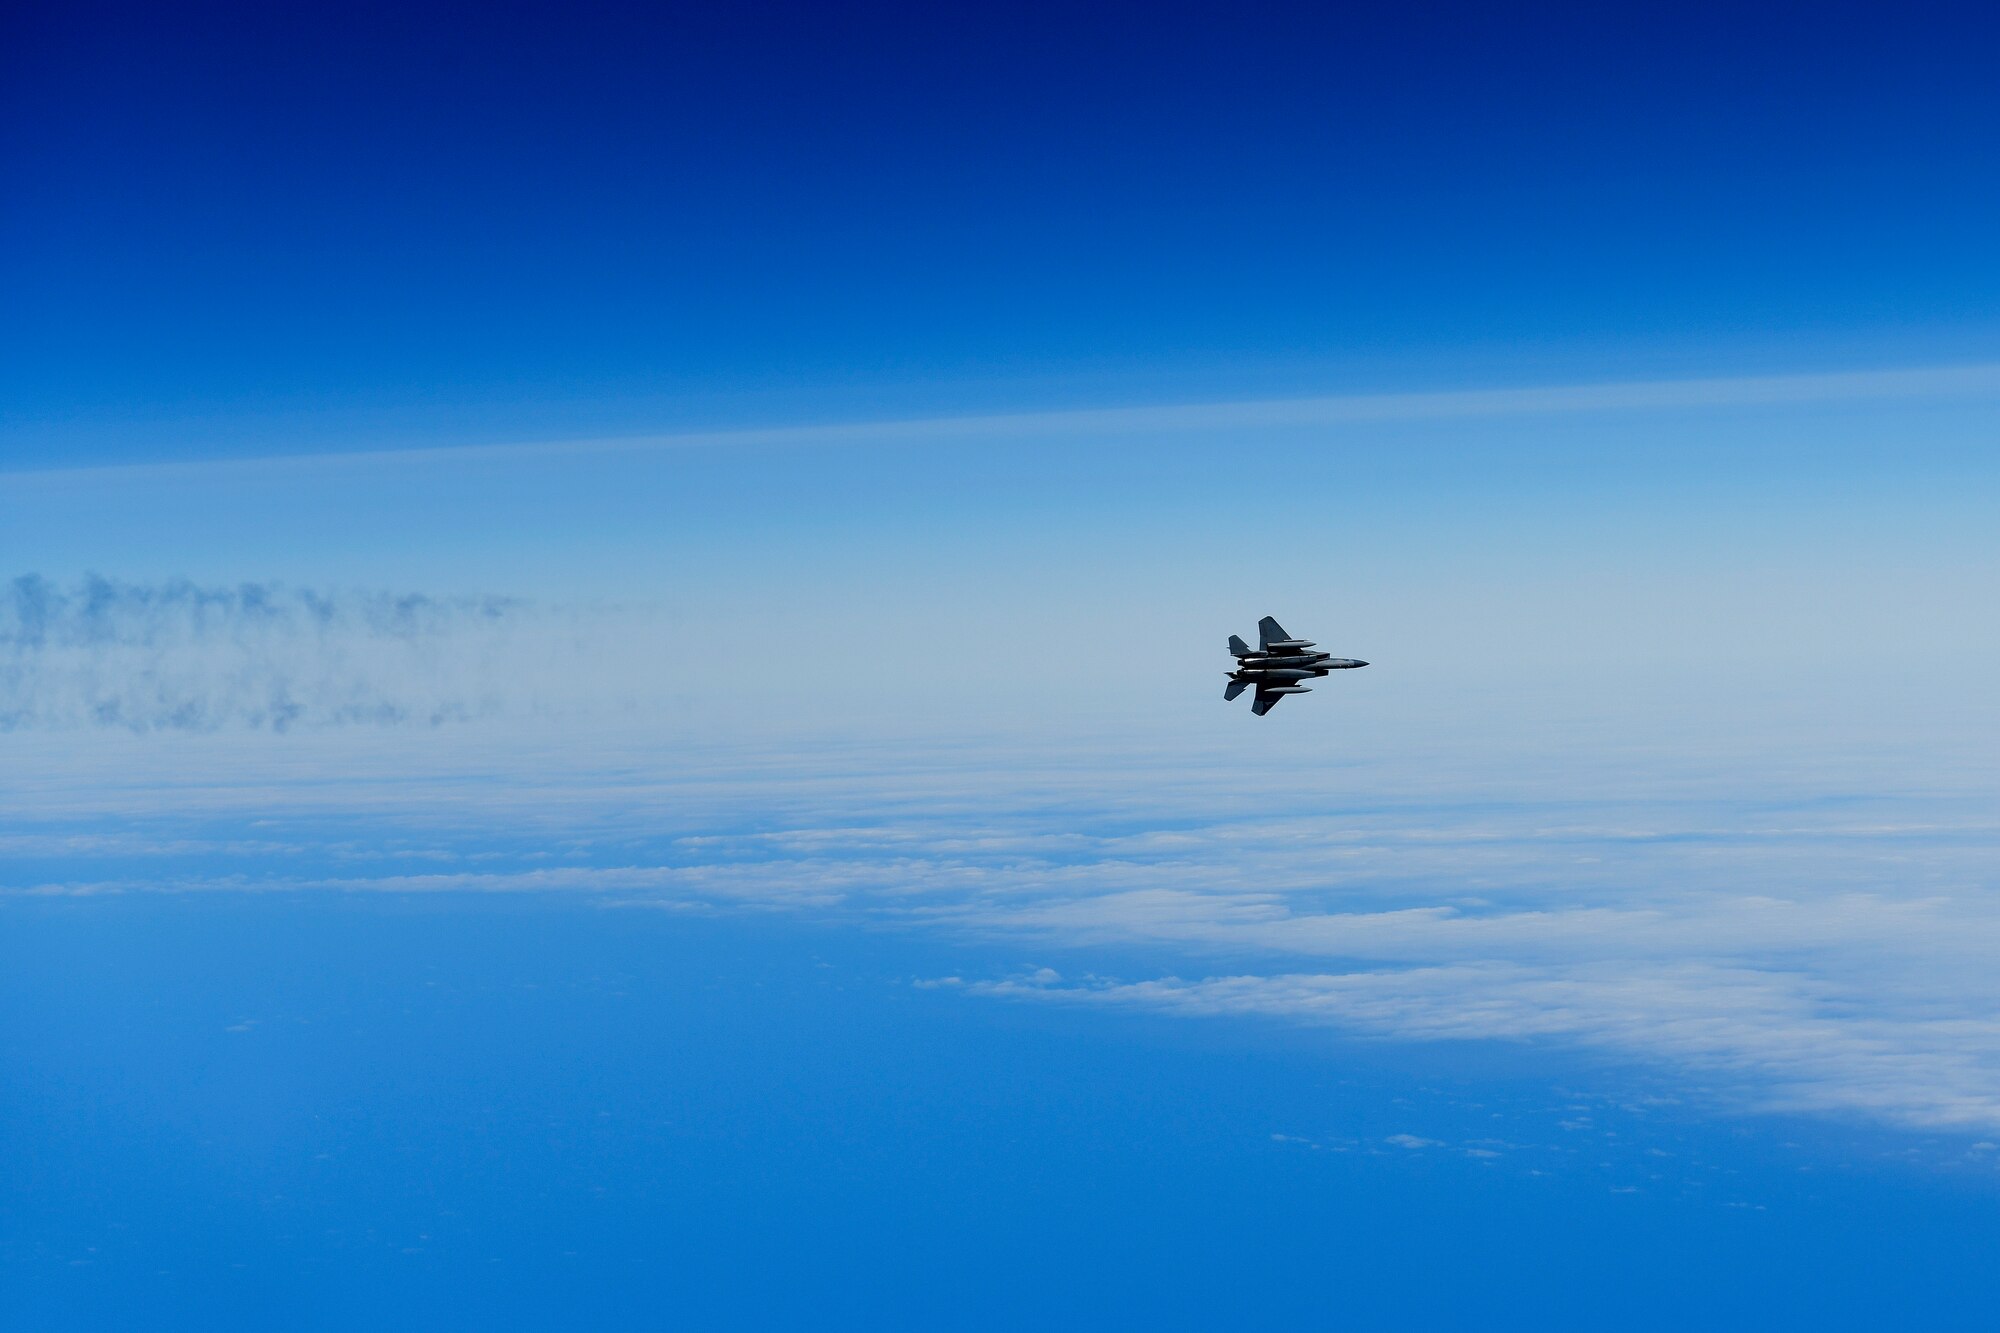 An F-15C Eagle assigned to the 493rd Fighter Squadron conducts basic fighter maneuvers in support of exercise Pointblank 19-2, over the Nprth Sea, June 27, 2019. The objective of the exercise is to prepare coalition warfighters for a highly contested fight against near-peer adversaries by providing a multi-dimensional battle-space to conduct advanced training in support of US, UK and French national interests. (U.S. Air Force photo/ Tech. Sgt. Matthew Plew)